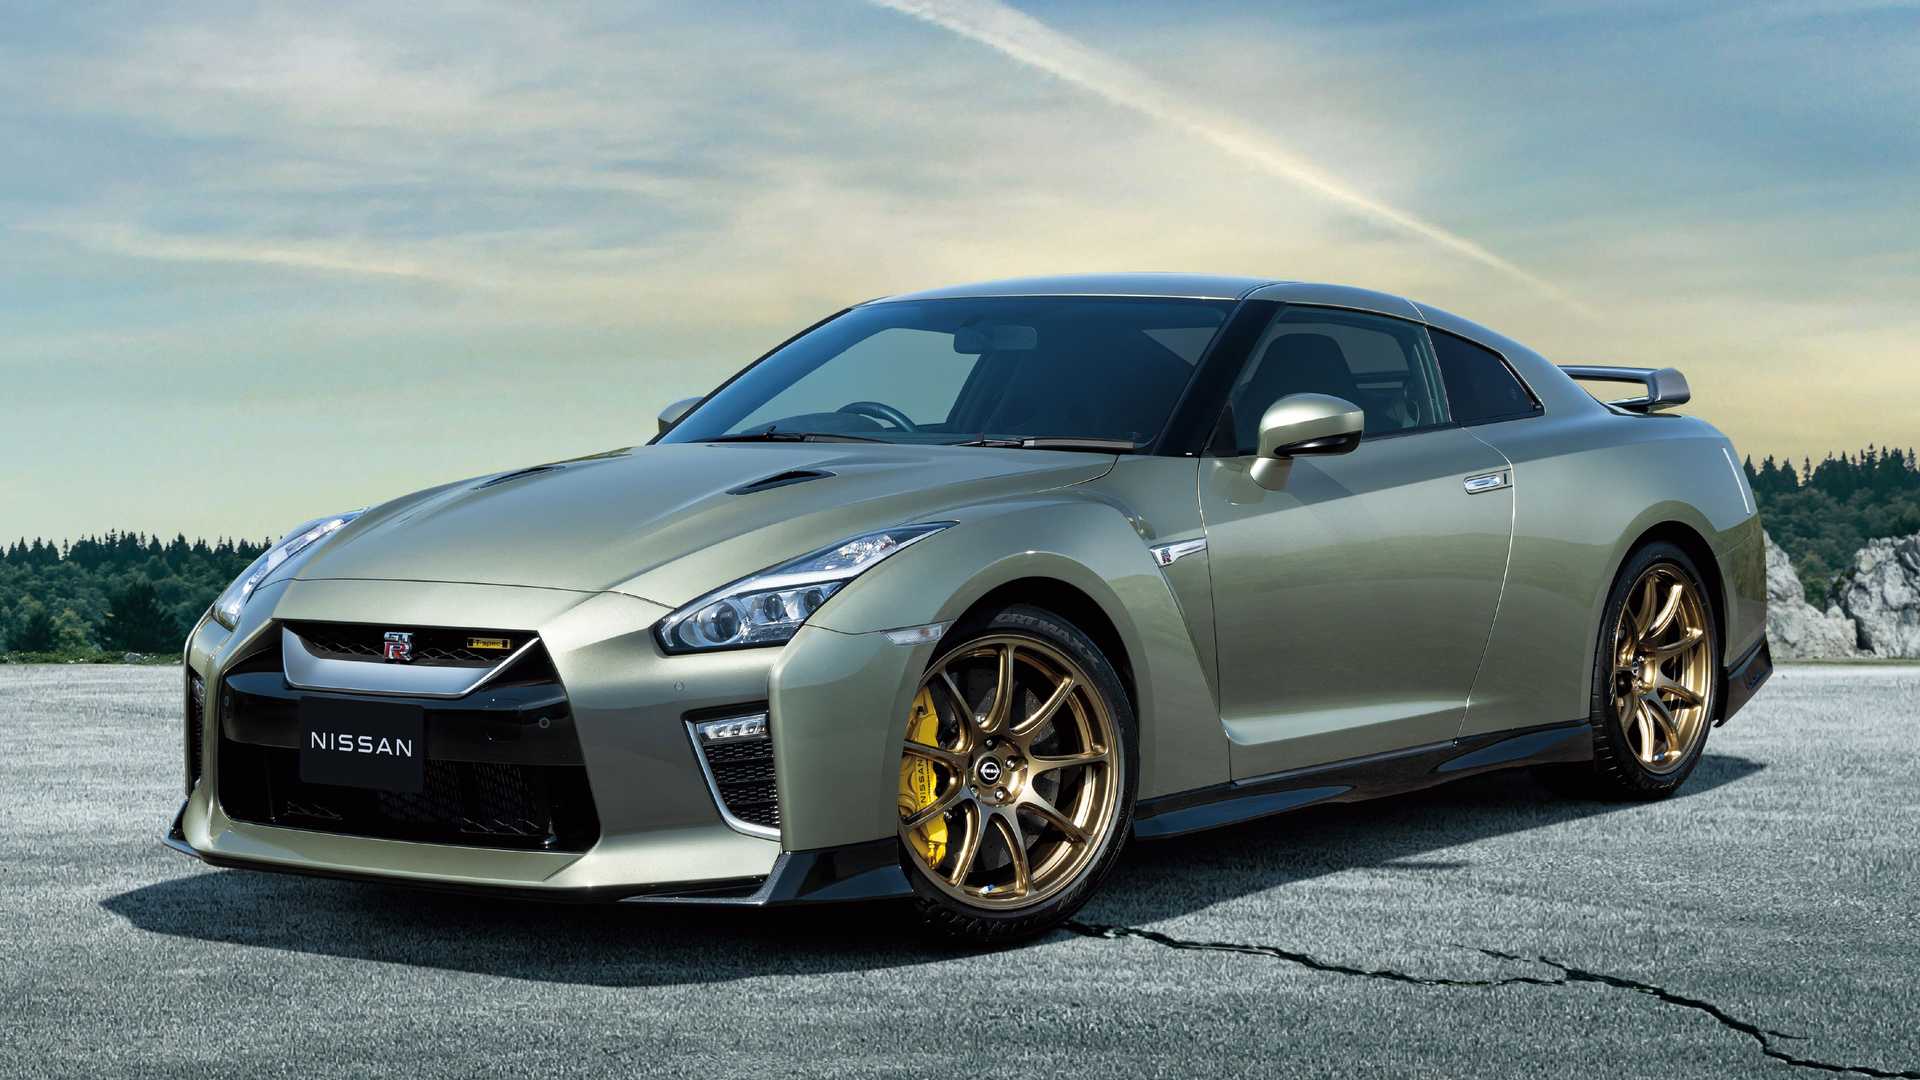 Goodbye to the Nissan GT-R in Europe: production ends